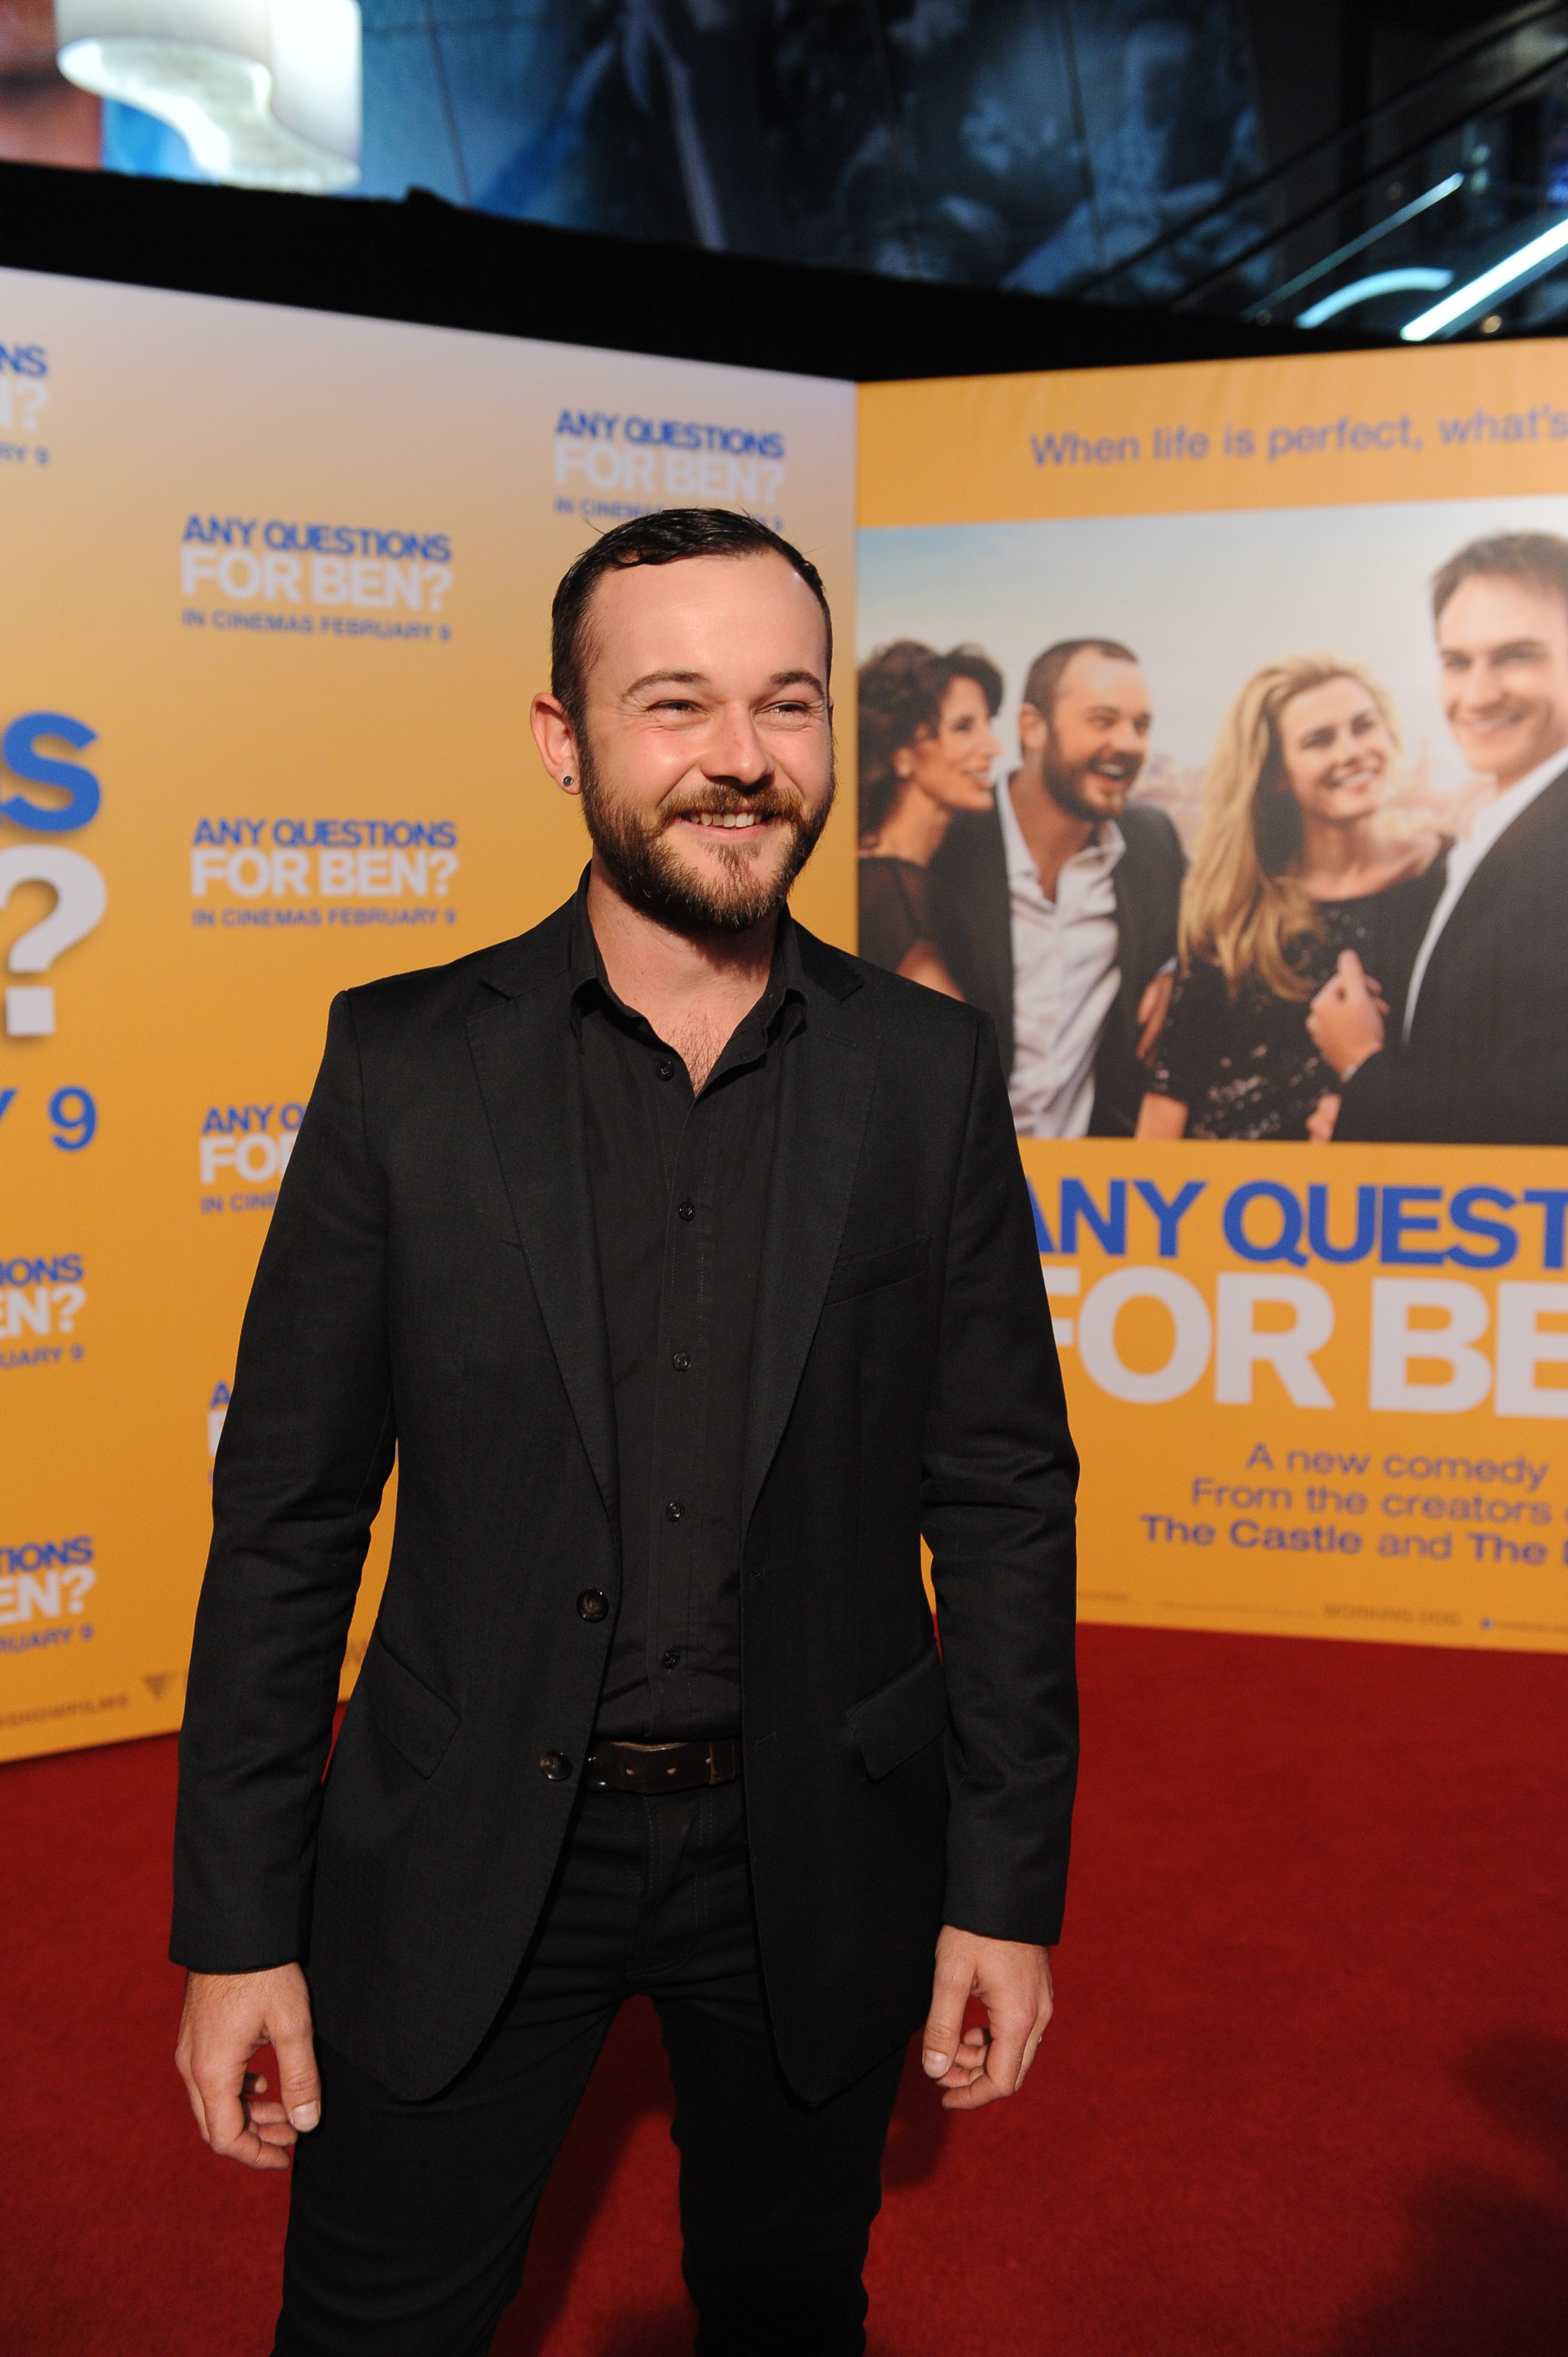 Daniel Henshall in Any Questions for Ben? (2012)